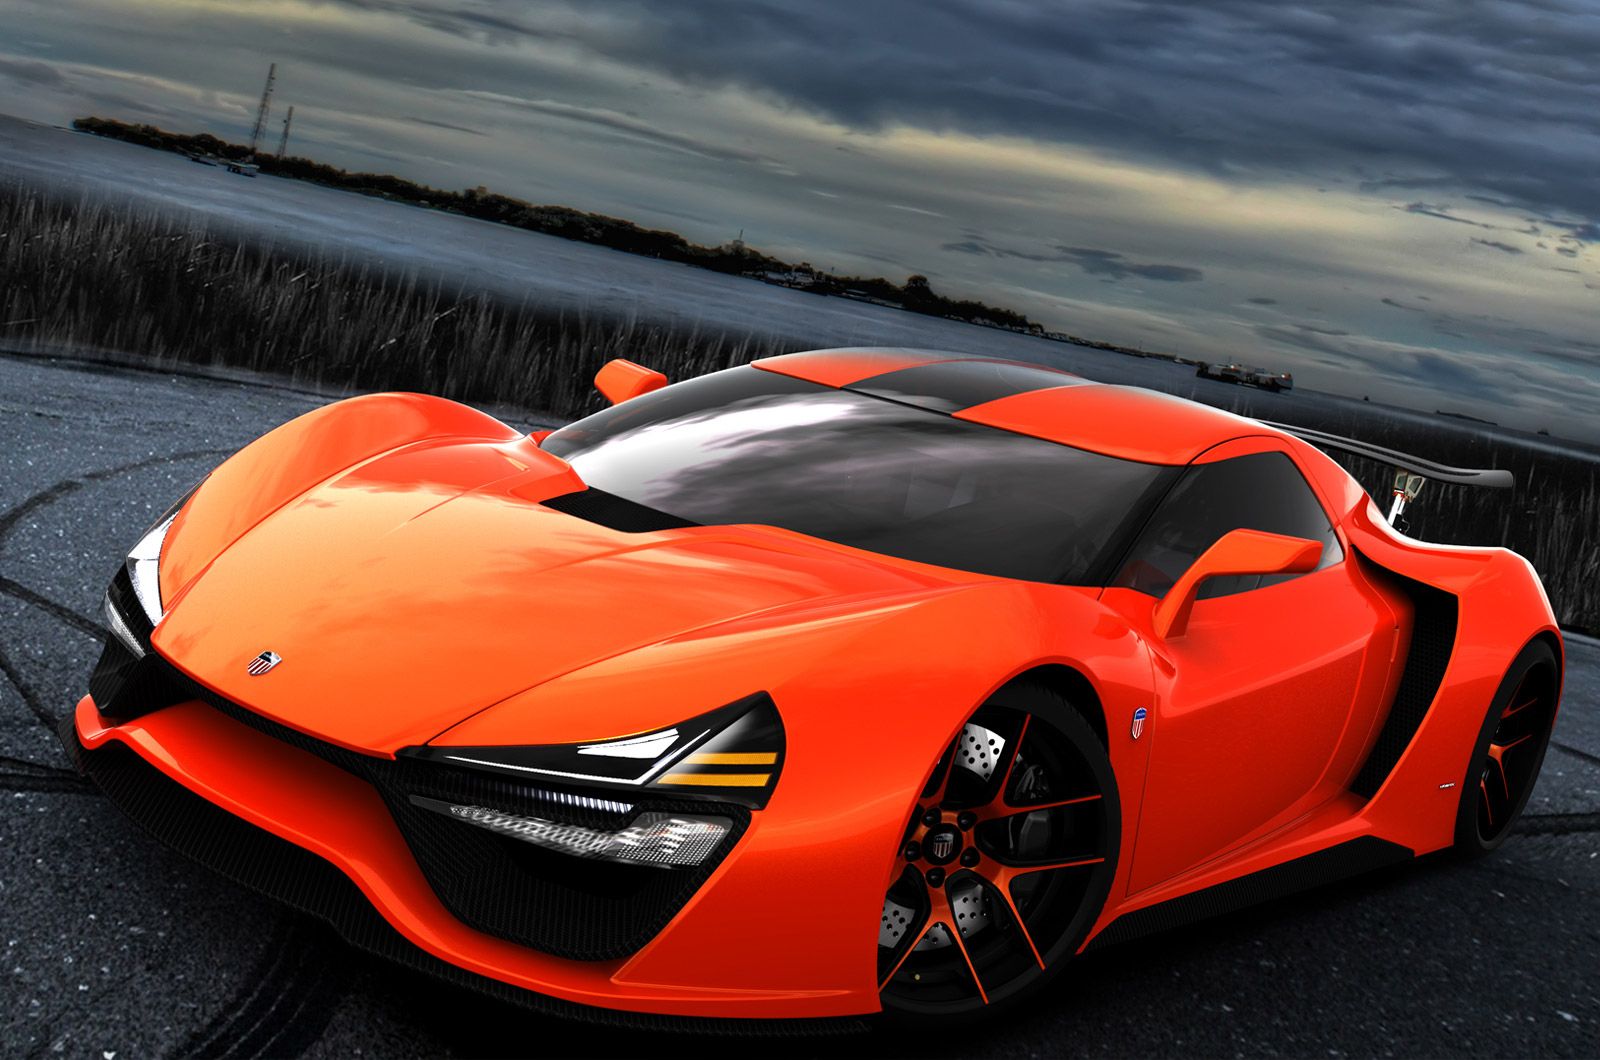 000 HP Trion Nemesis To Enter Production In 2016